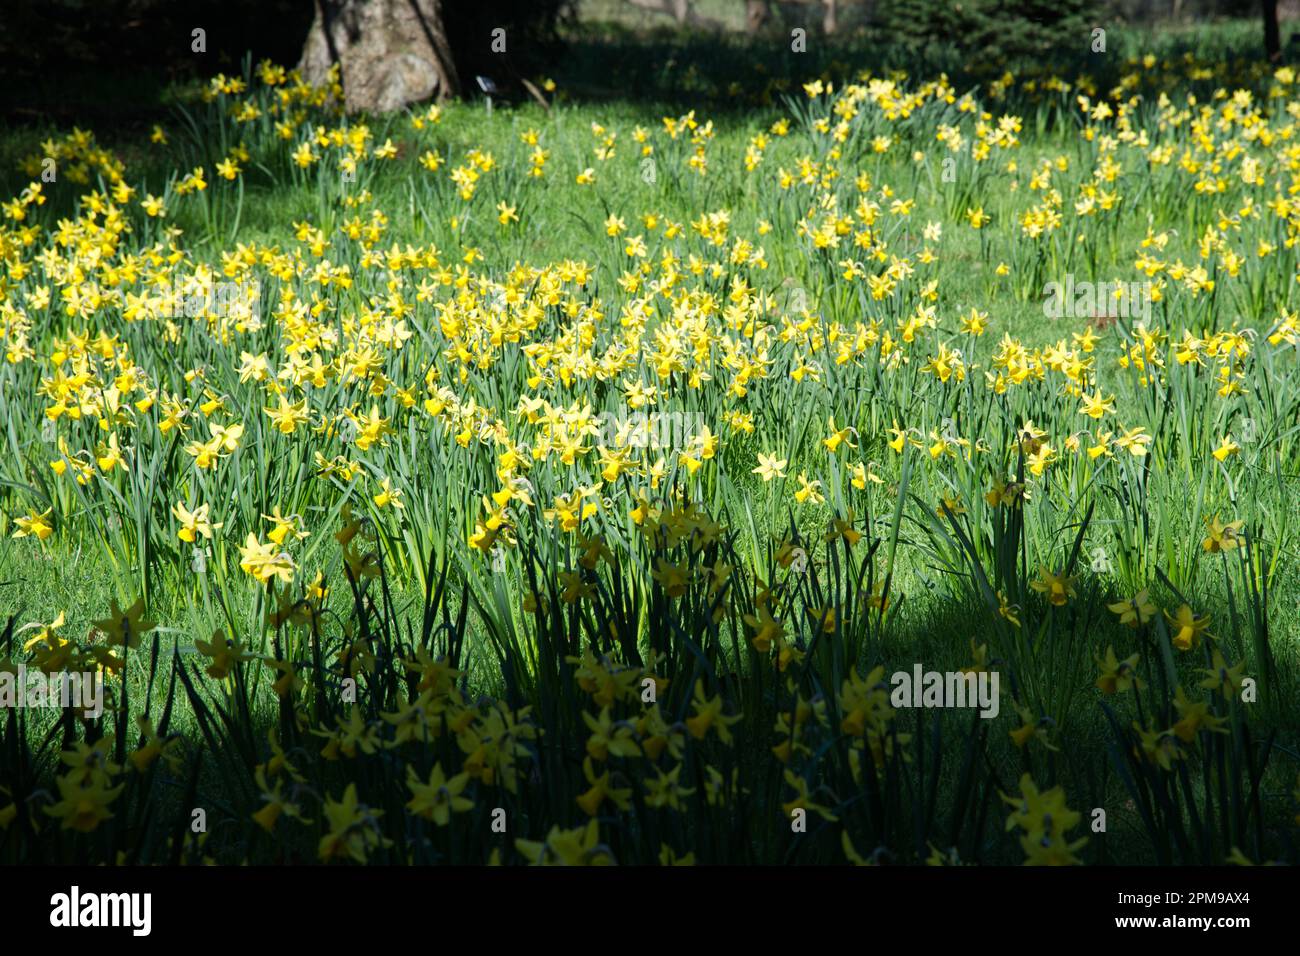 Bright Yellow spring flowers of dwarf daffodil narcissus February Gold in UK garden April Stock Photo